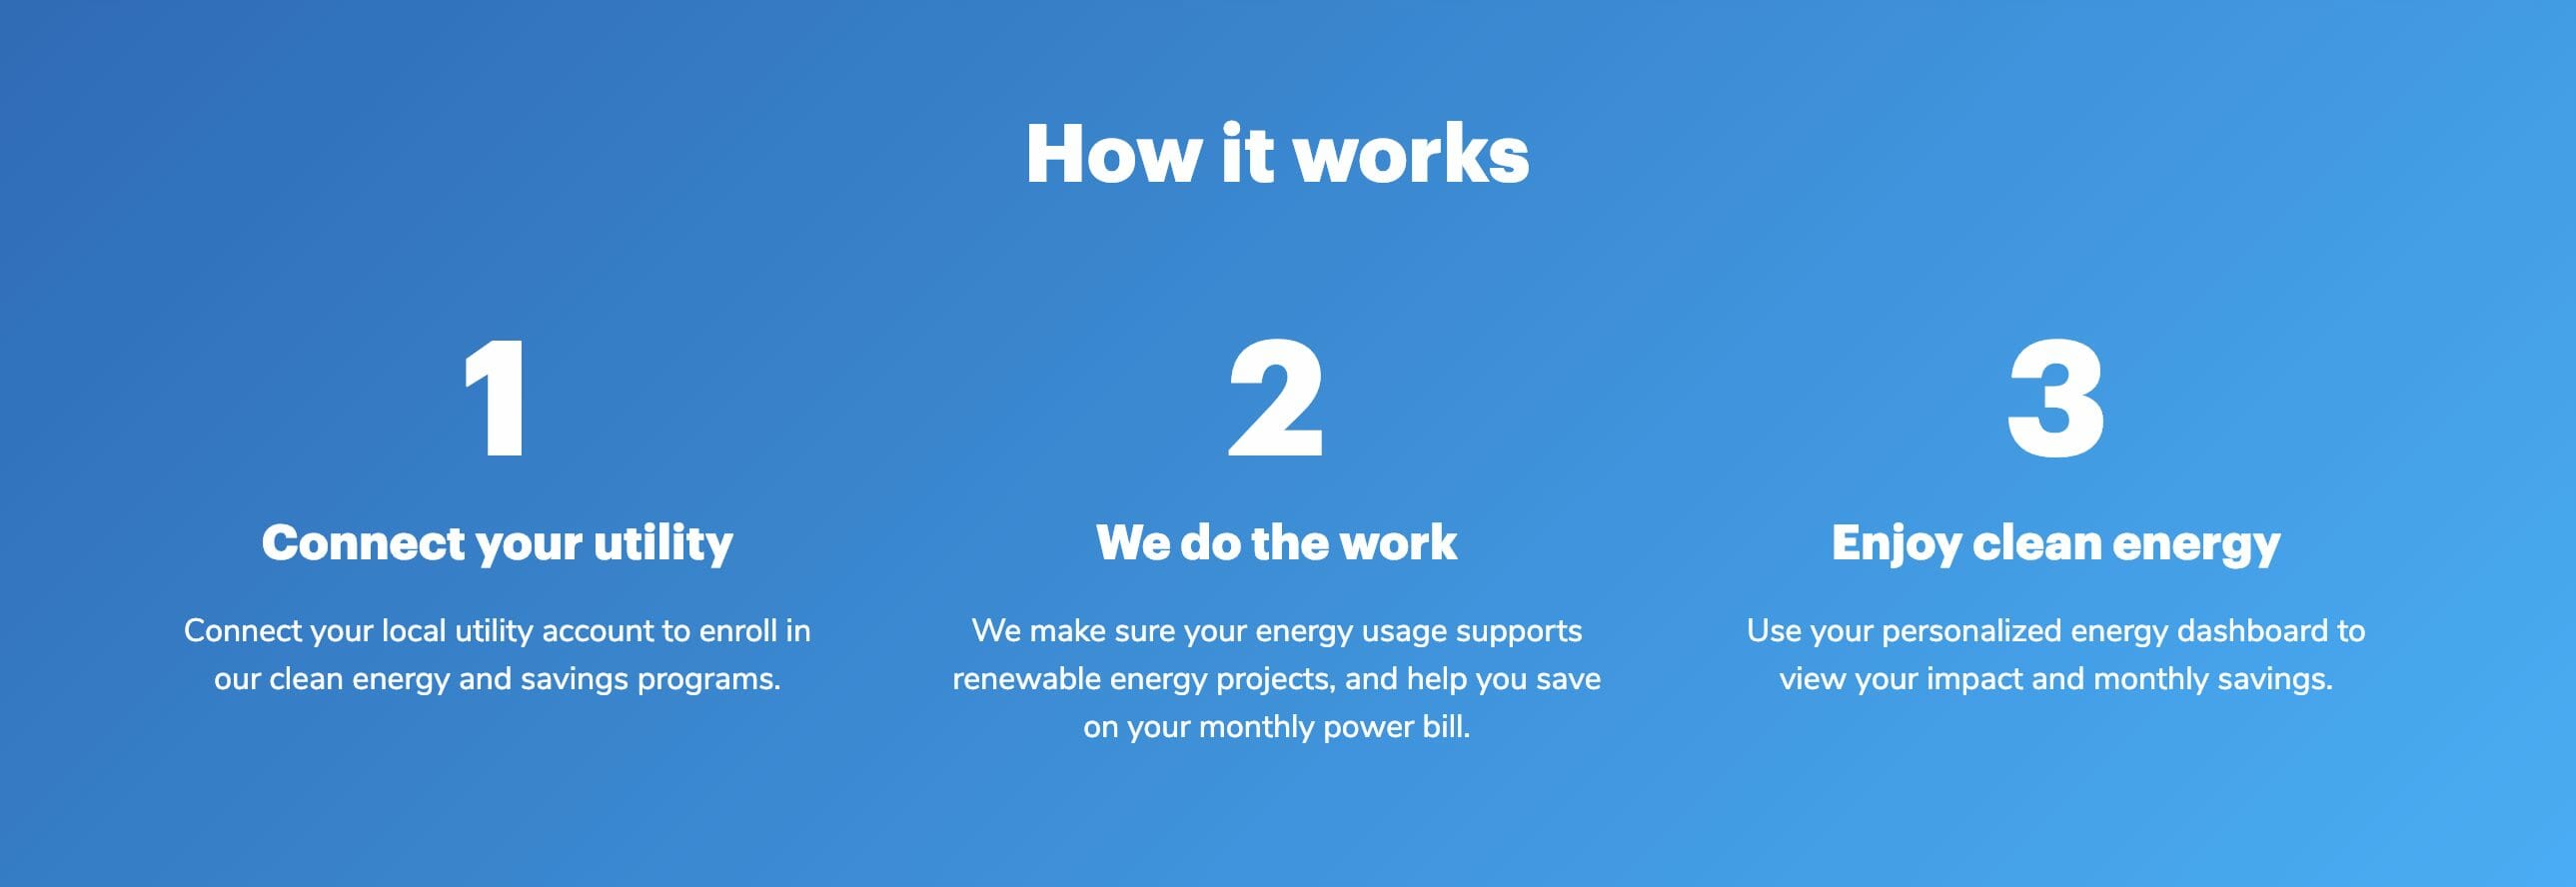 How it works: Connect your utility, we do the work, and then enjoy clean energy.